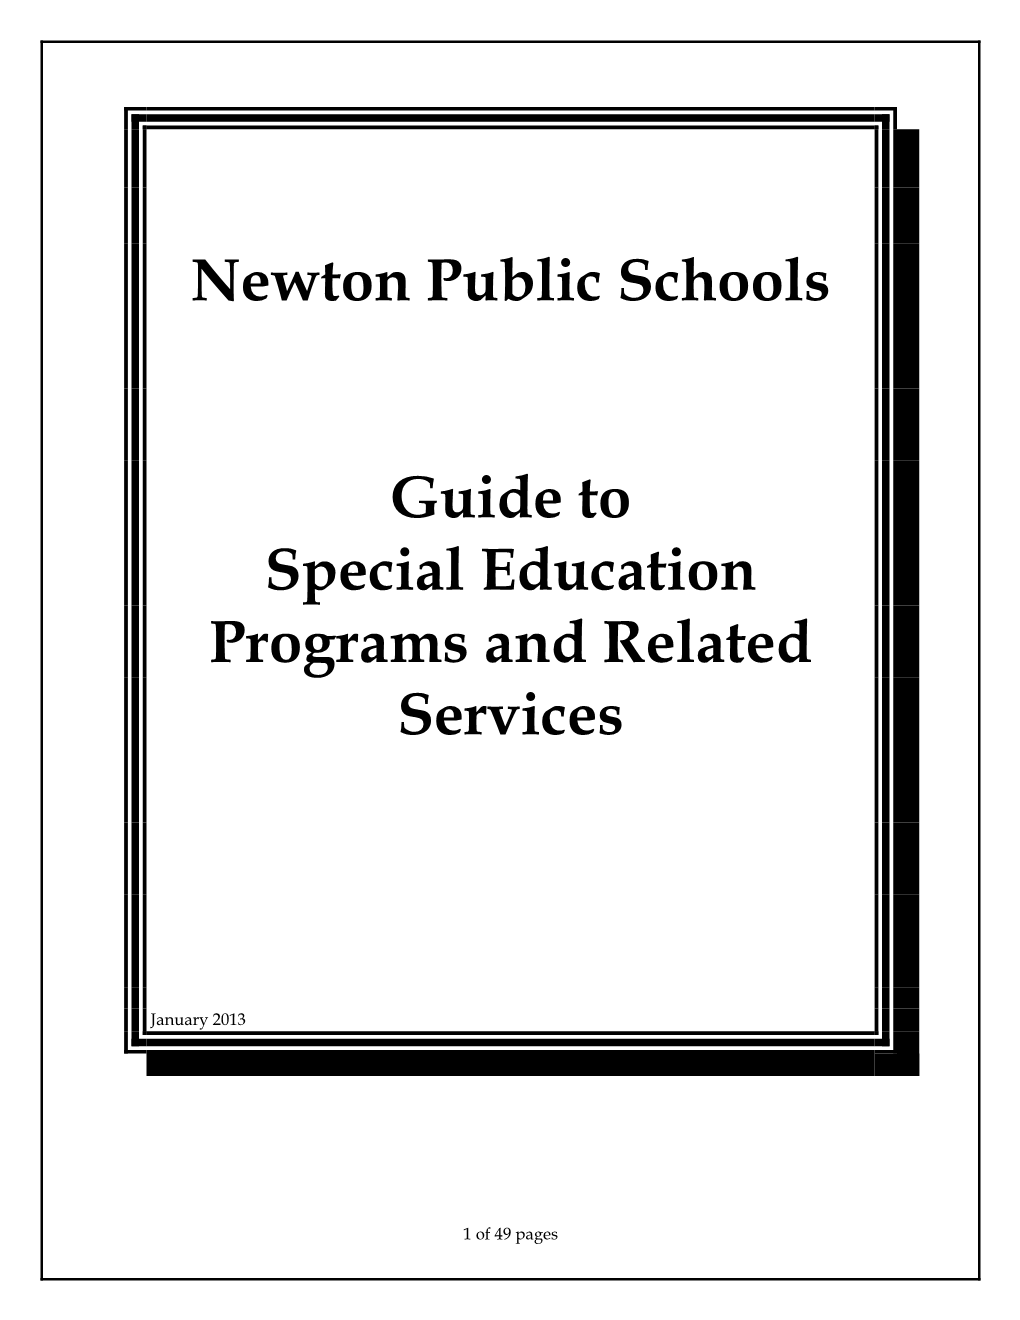 Newton Public Schools Guide to Special Education Programs and Related Services